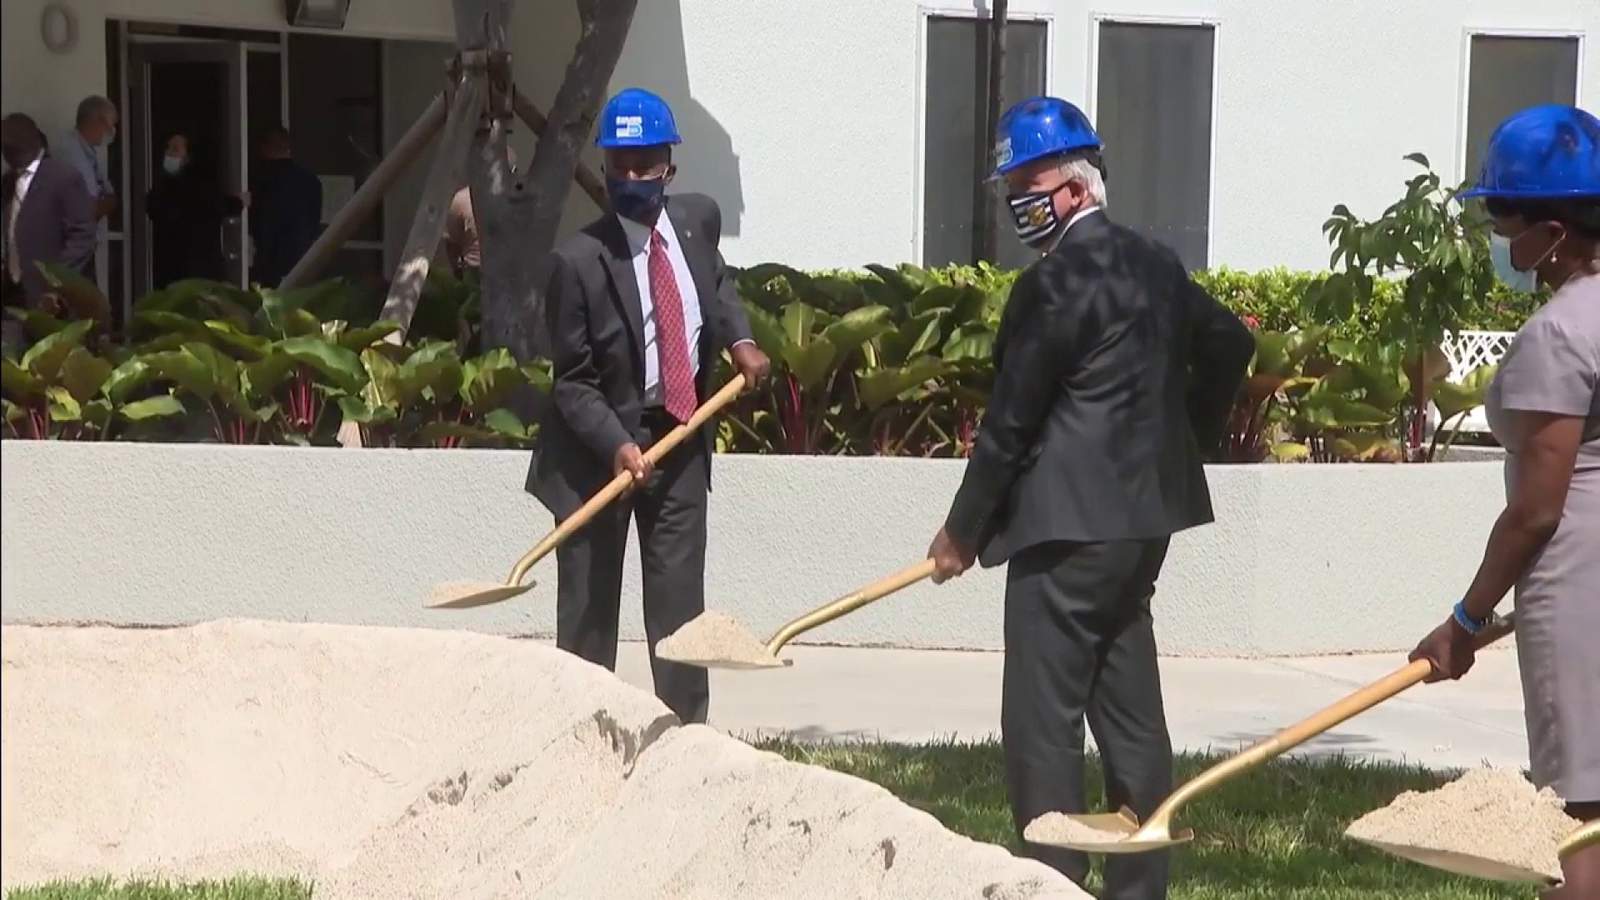 Ben Carson in Miami to break ground on opportunity zone affordable housing